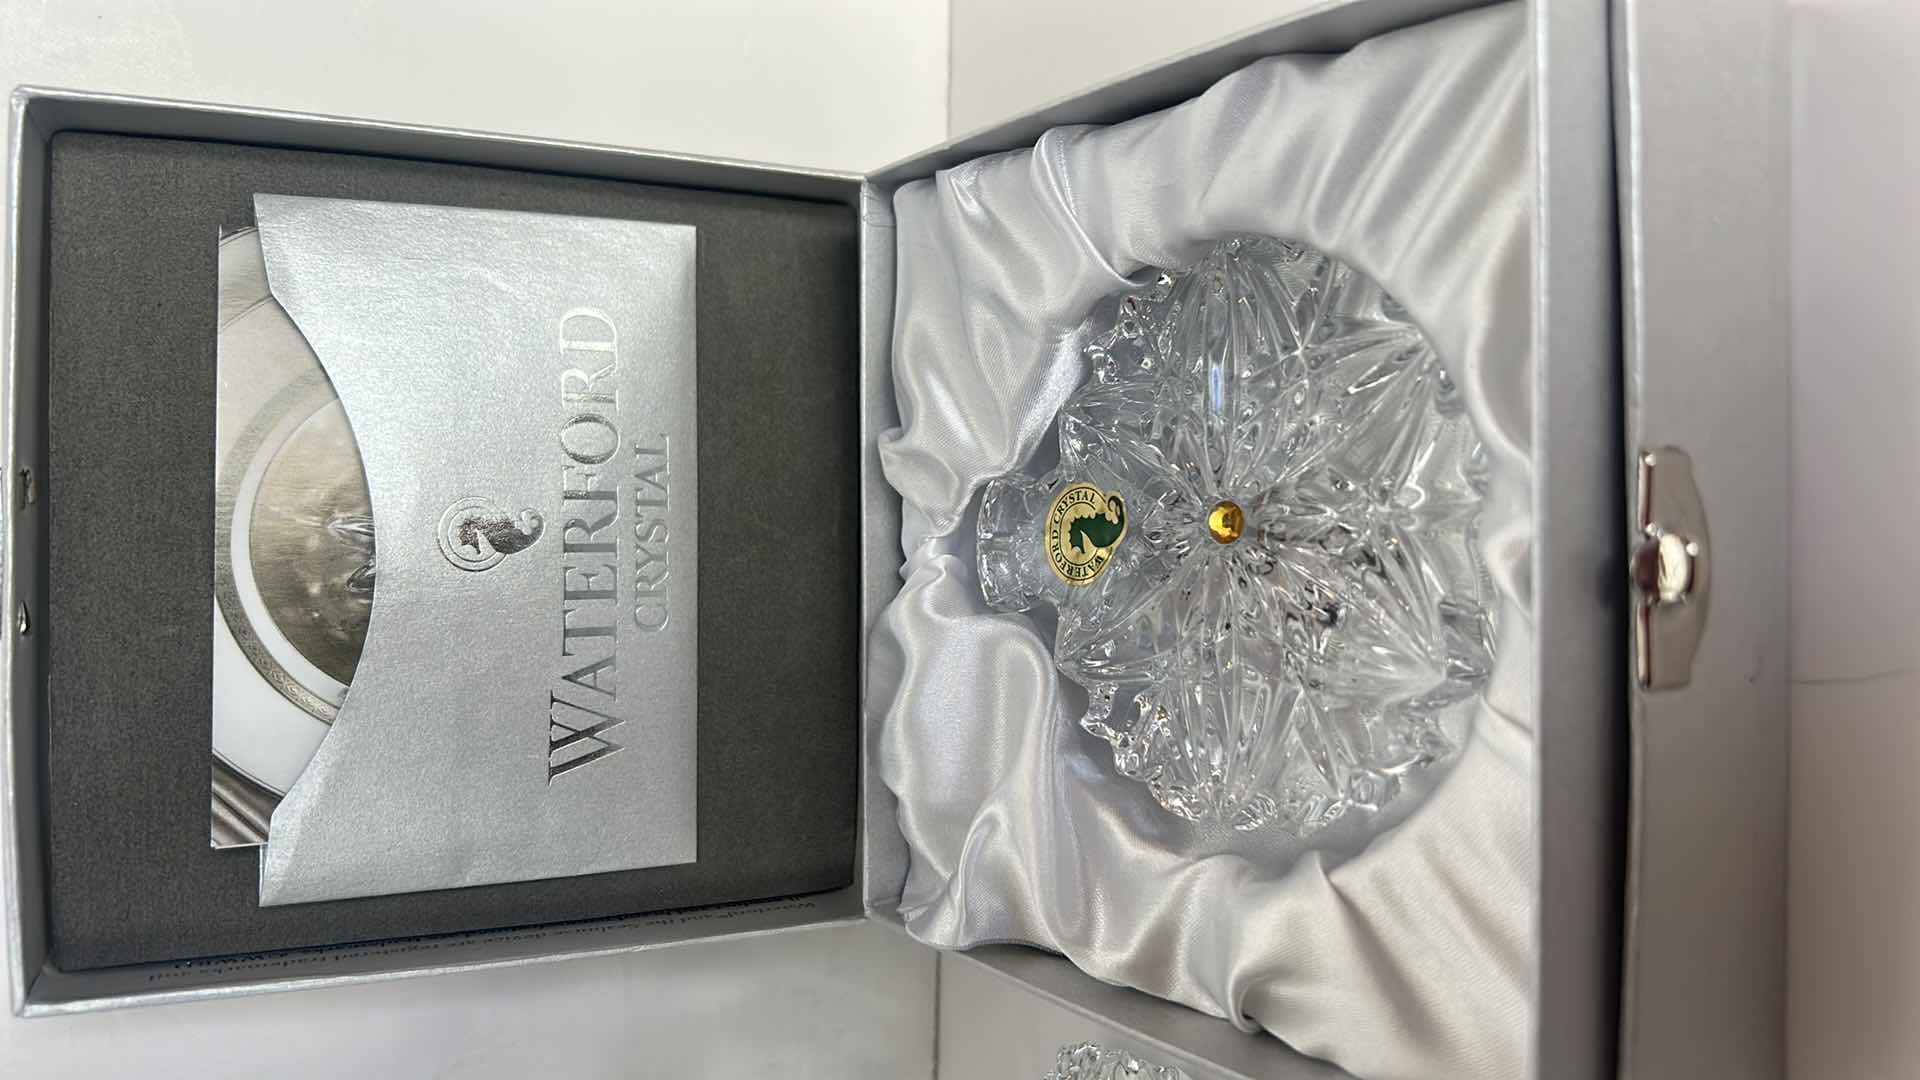 Photo 2 of 2 COLLECTIBLE WATERFORD CRYSTAL PIECES- SNOWFLAKE WISHES LIMITED EDITION AND ANGEL